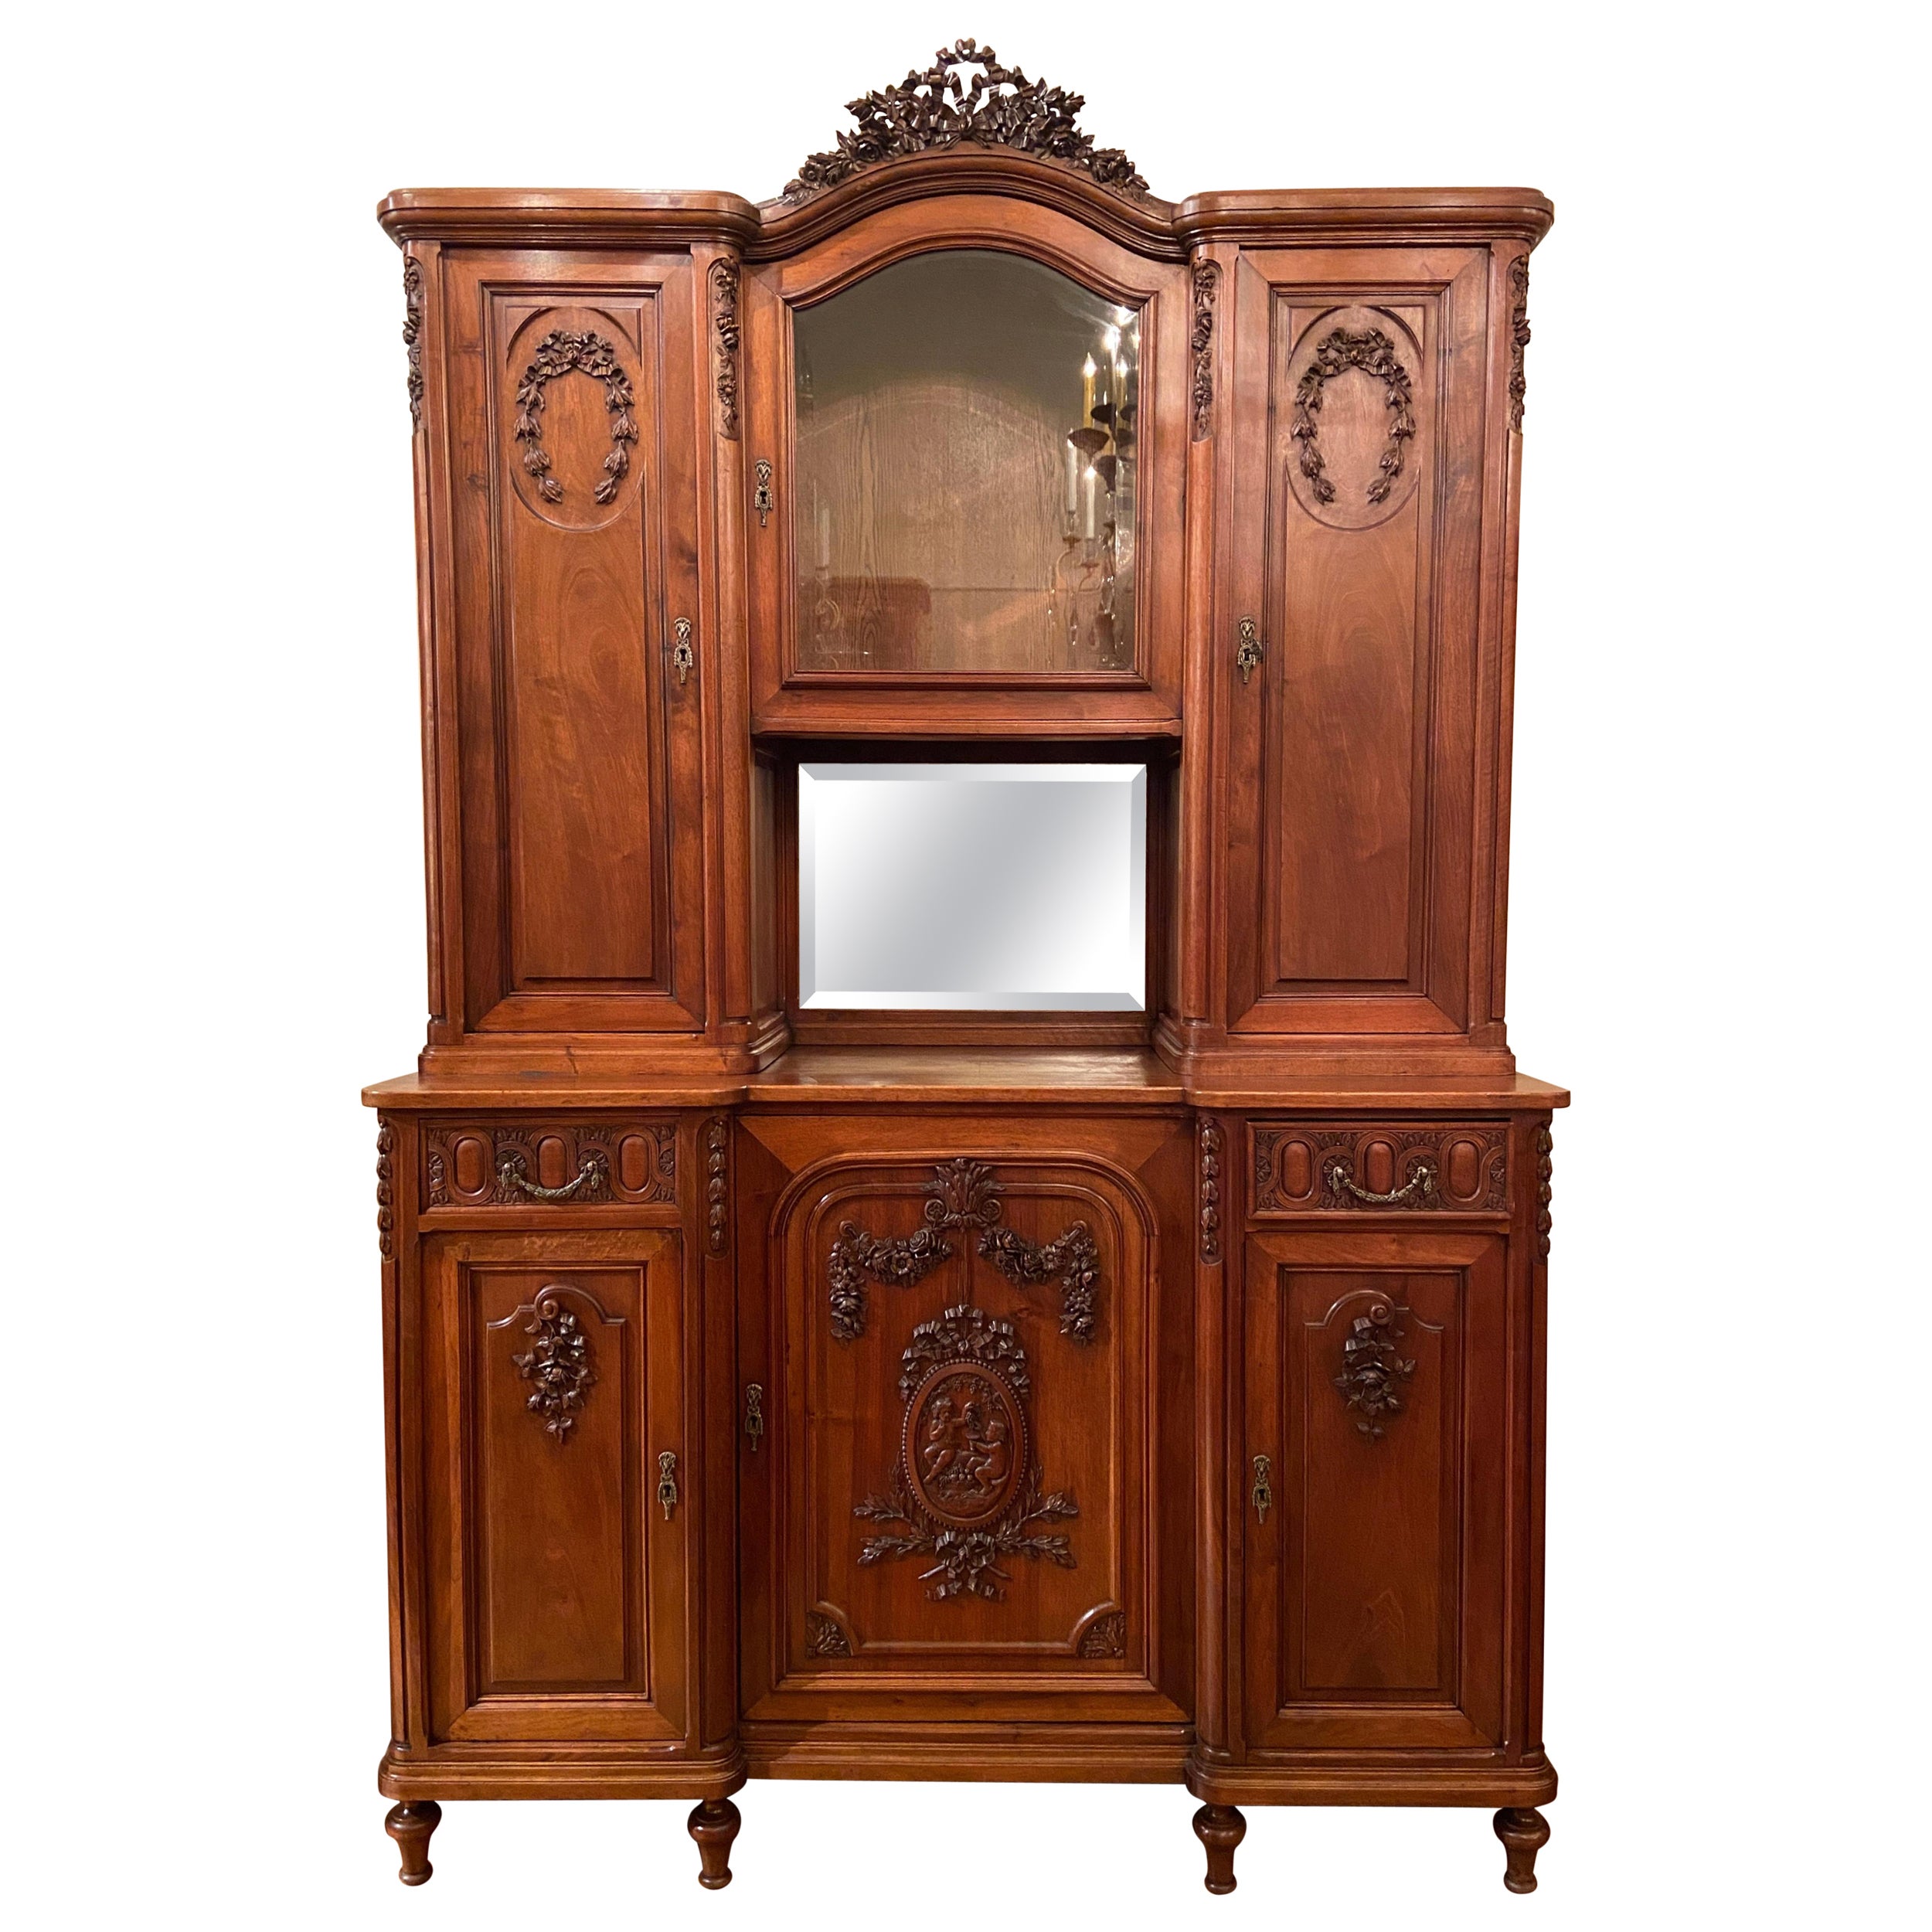 Antique French Carved Walnut, Beveled Glass and Mirror Cabinet, circa 1875-1895